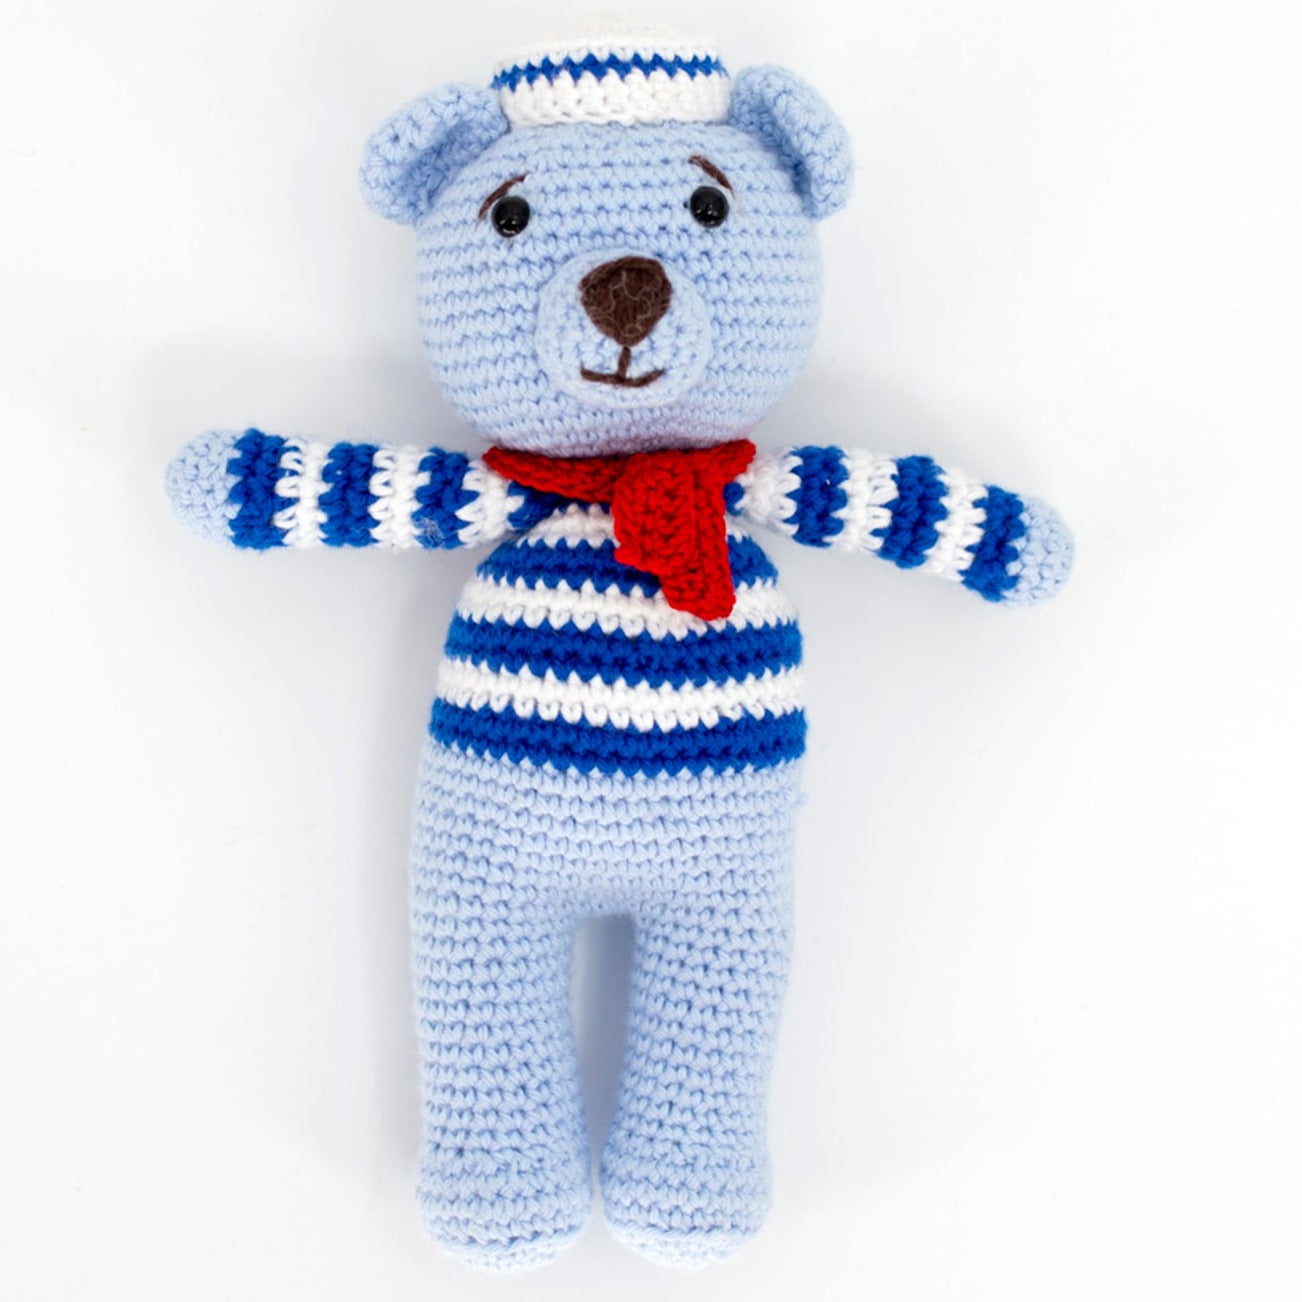 Adorable sailor teddy bear crochet baby security blanket with matching teddy bear and rattle. All handmade with hypoallergenic organic cotton. 